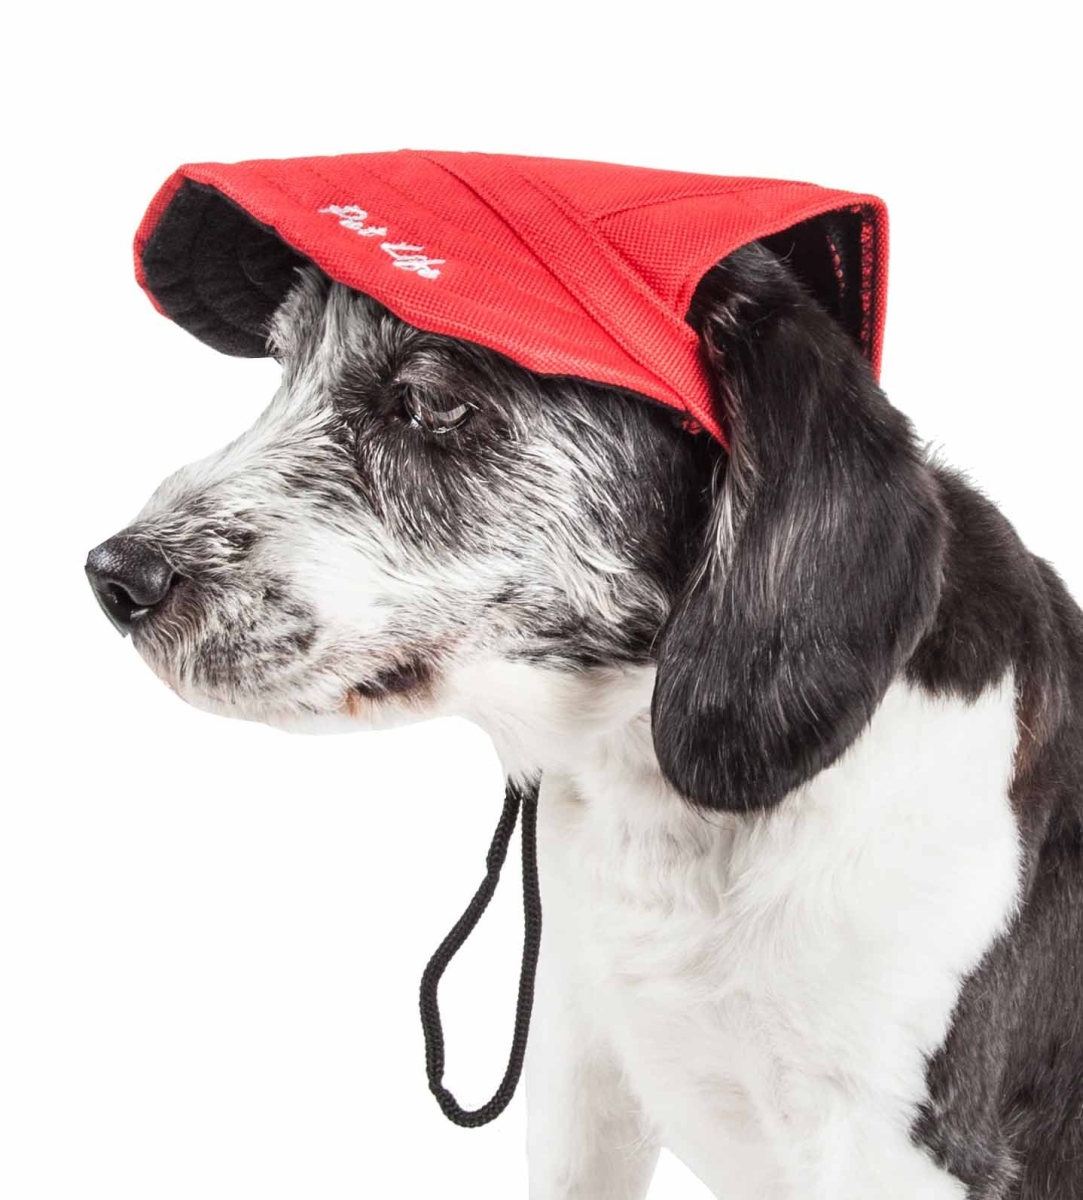 Picture of Pet Life HT6RDMD Cap-Tivating UV Protectant Adjustable Fashion Dog Hat - Red, Medium